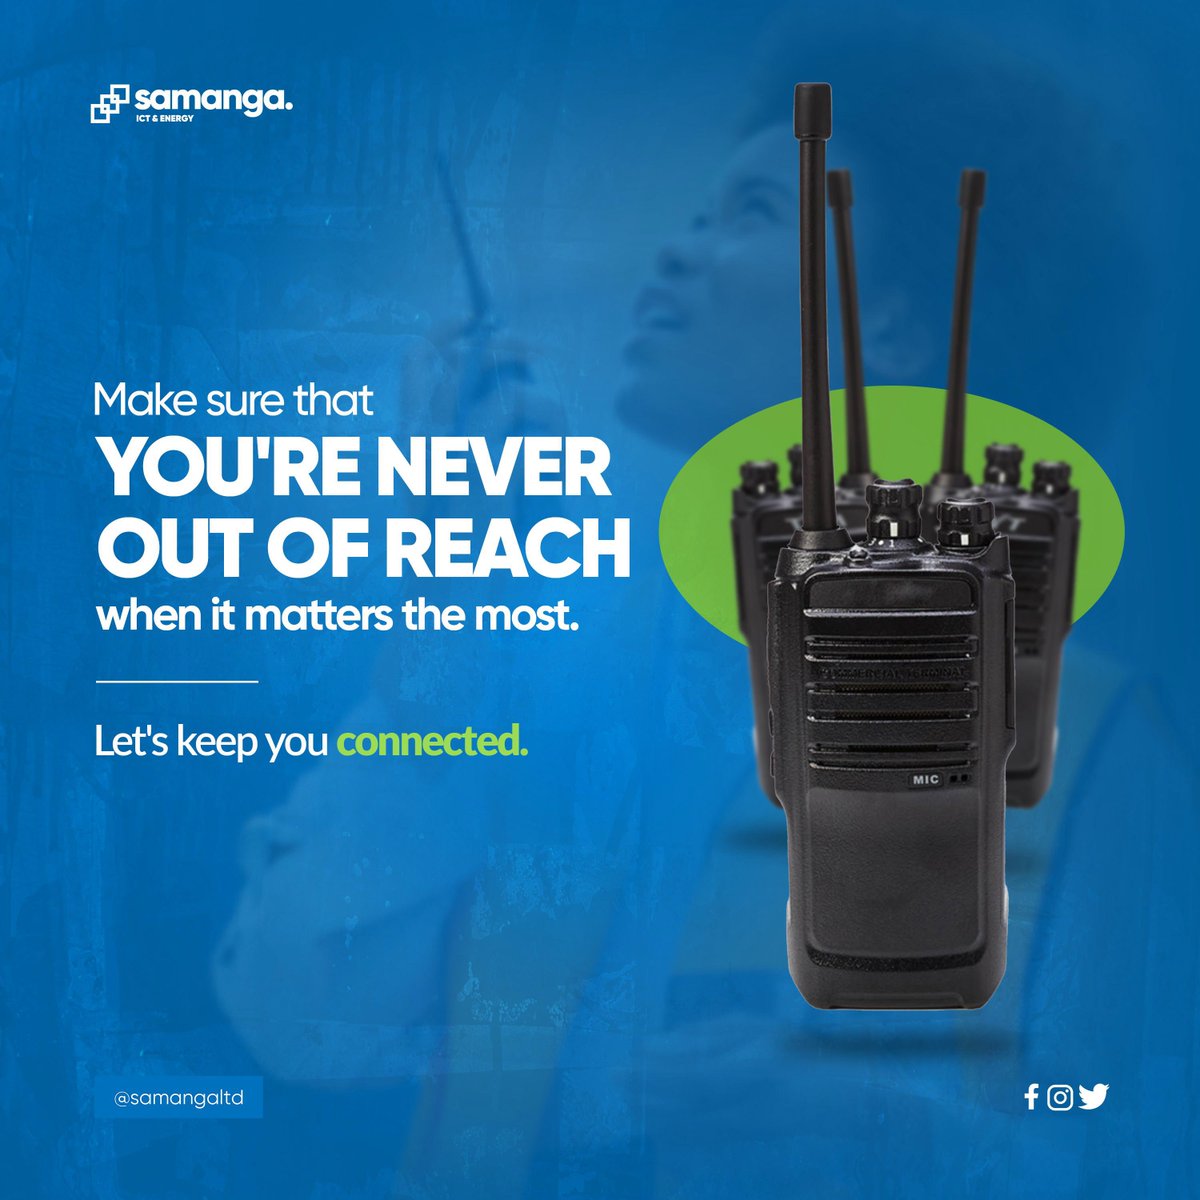 Effective communication is crucial, especially in environments where quick responses are key. Our communication devices ensure that you connect and communicate clearly with your teammates without delay. samangasolutions.com/Communication.… #Samanga4U